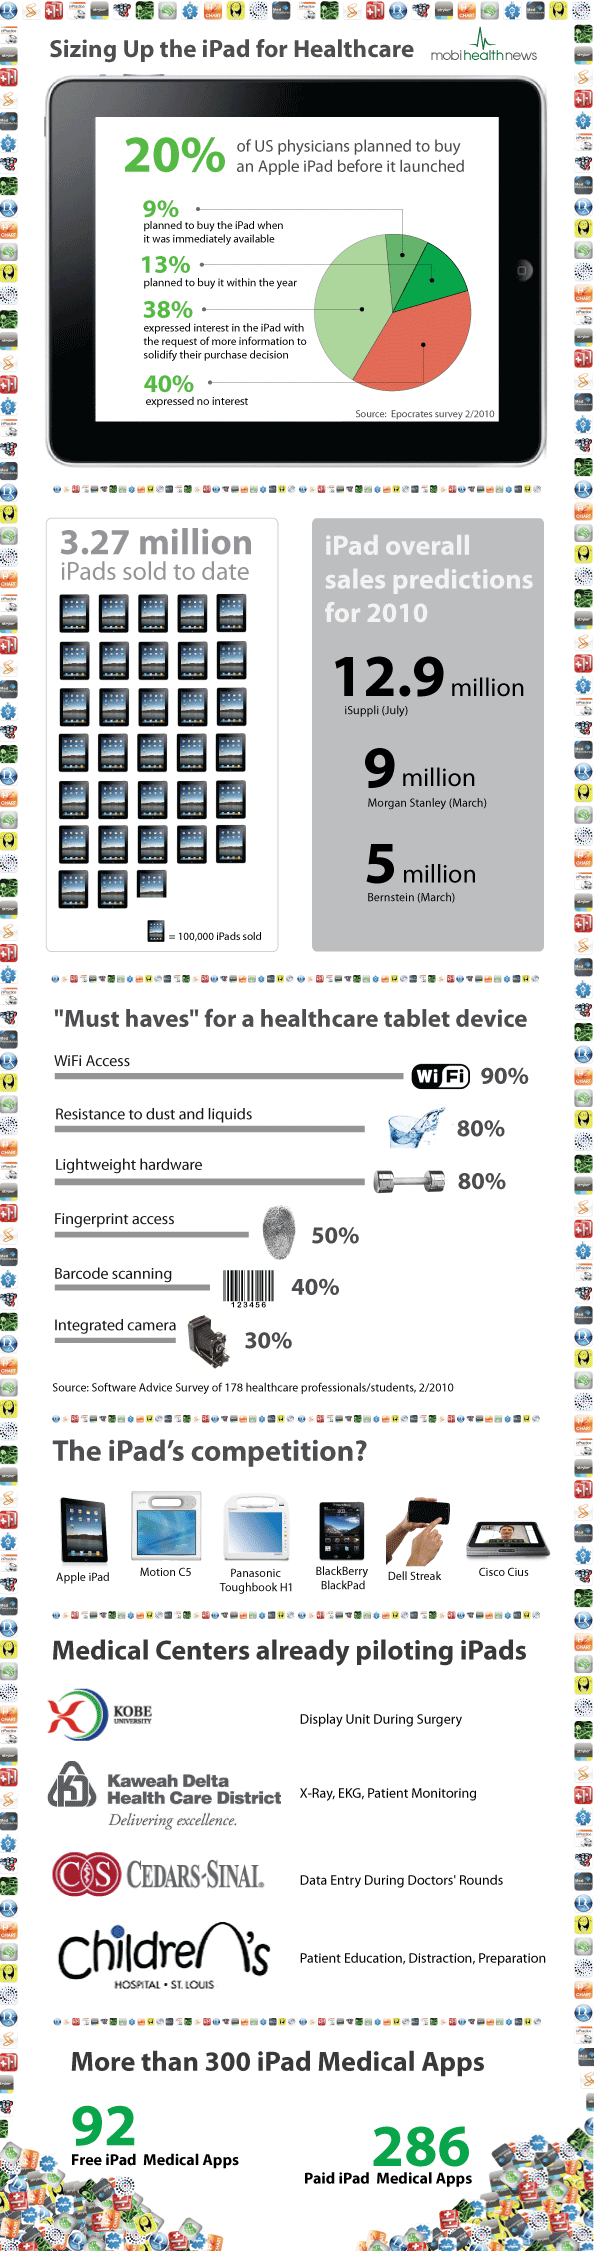 iPad Infographic for Healthcare 